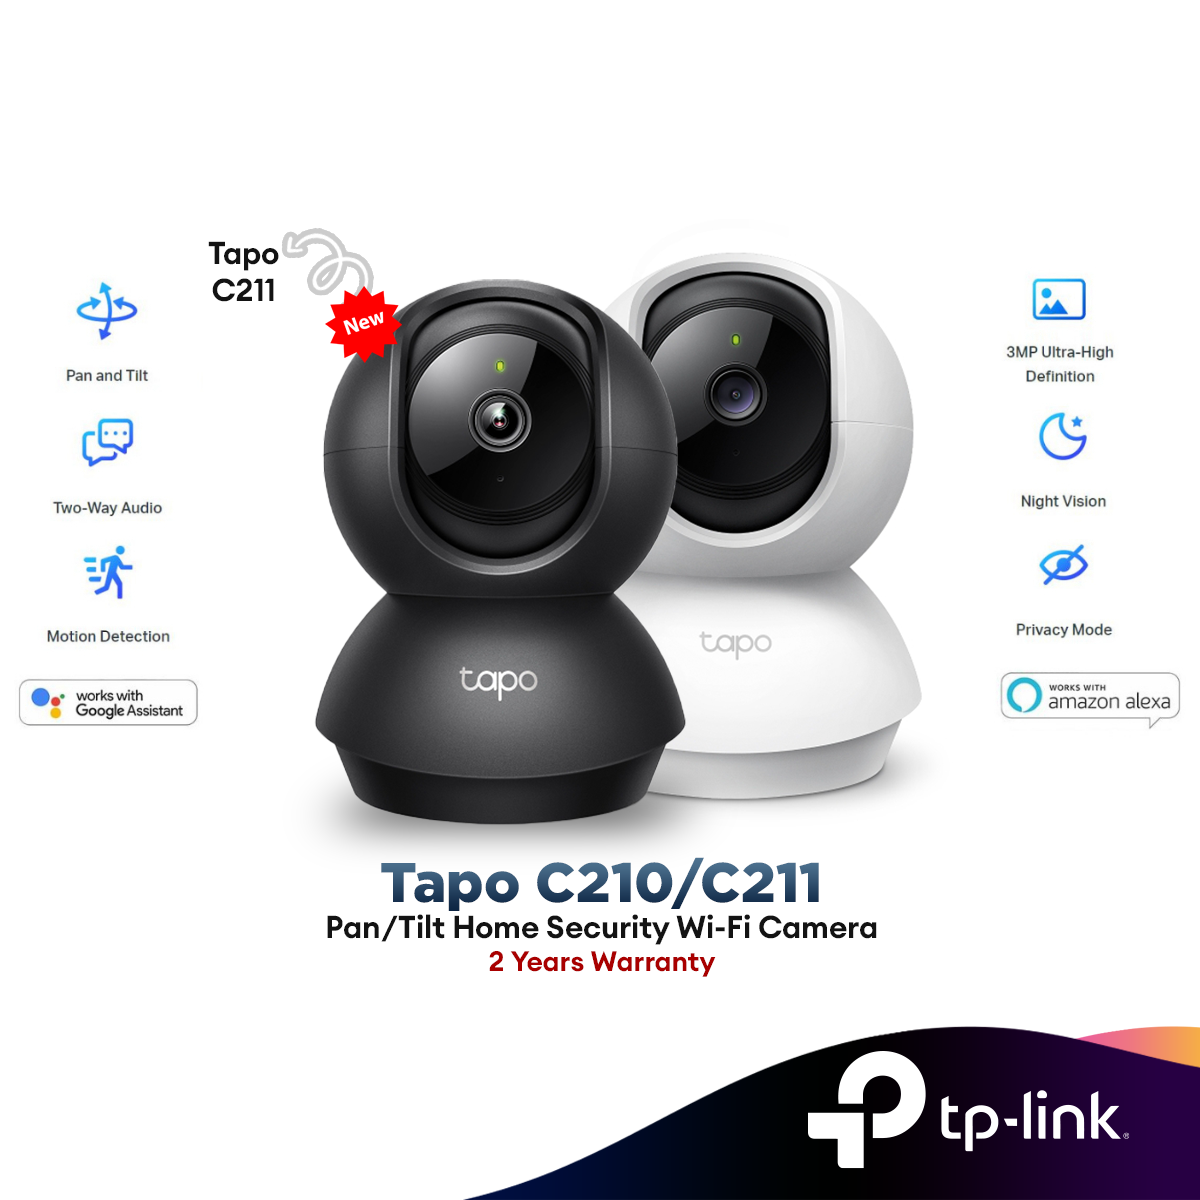 TP-Link Tapo C200 FHD Pan / Tilt Wireless WiFi Home Security